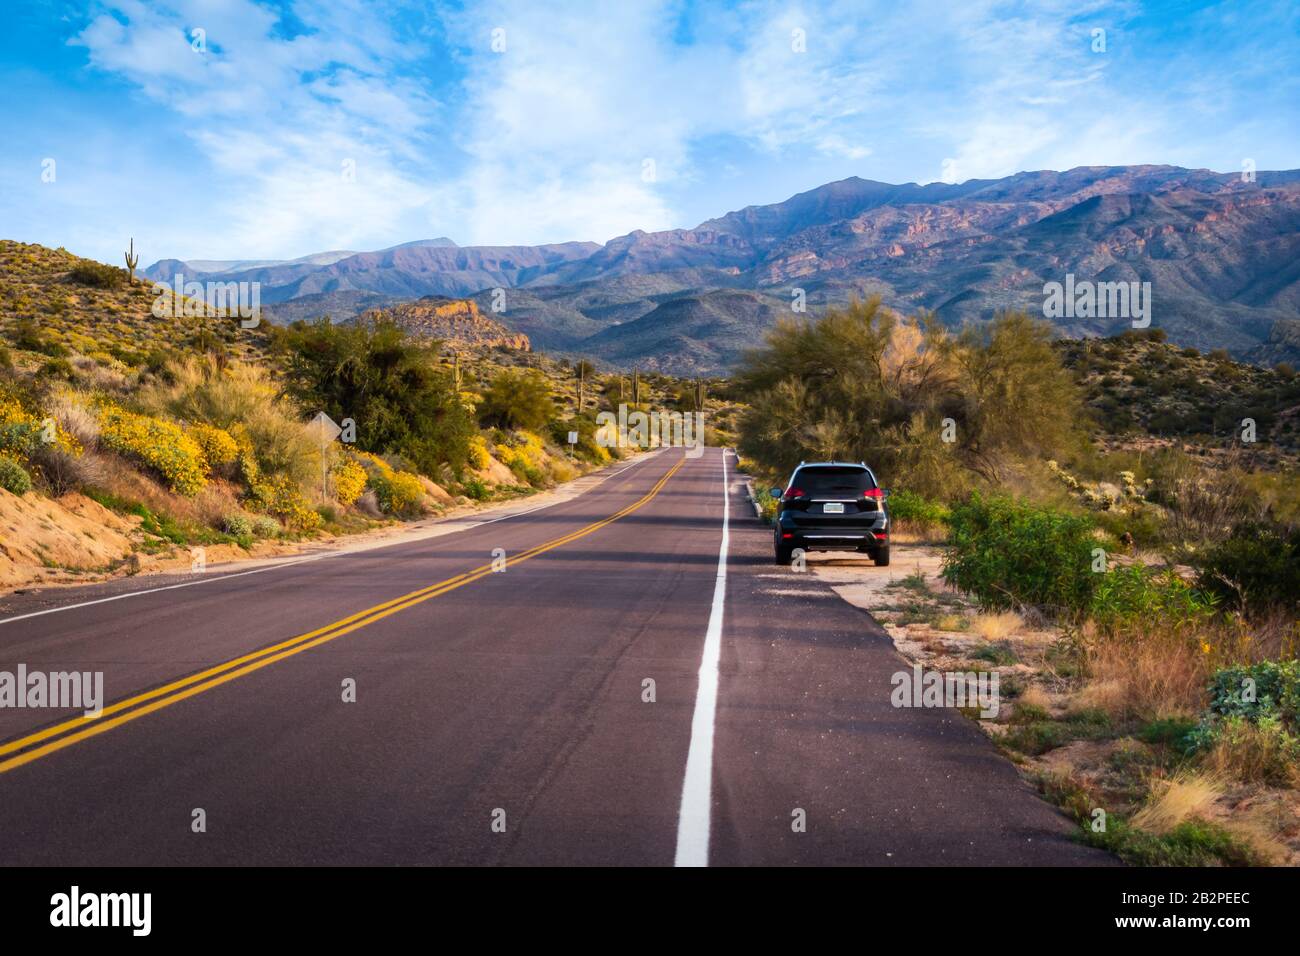 A black sports utility vehicle parked on the side of a road in Arizona with desert and mountains around it. Stock Photo